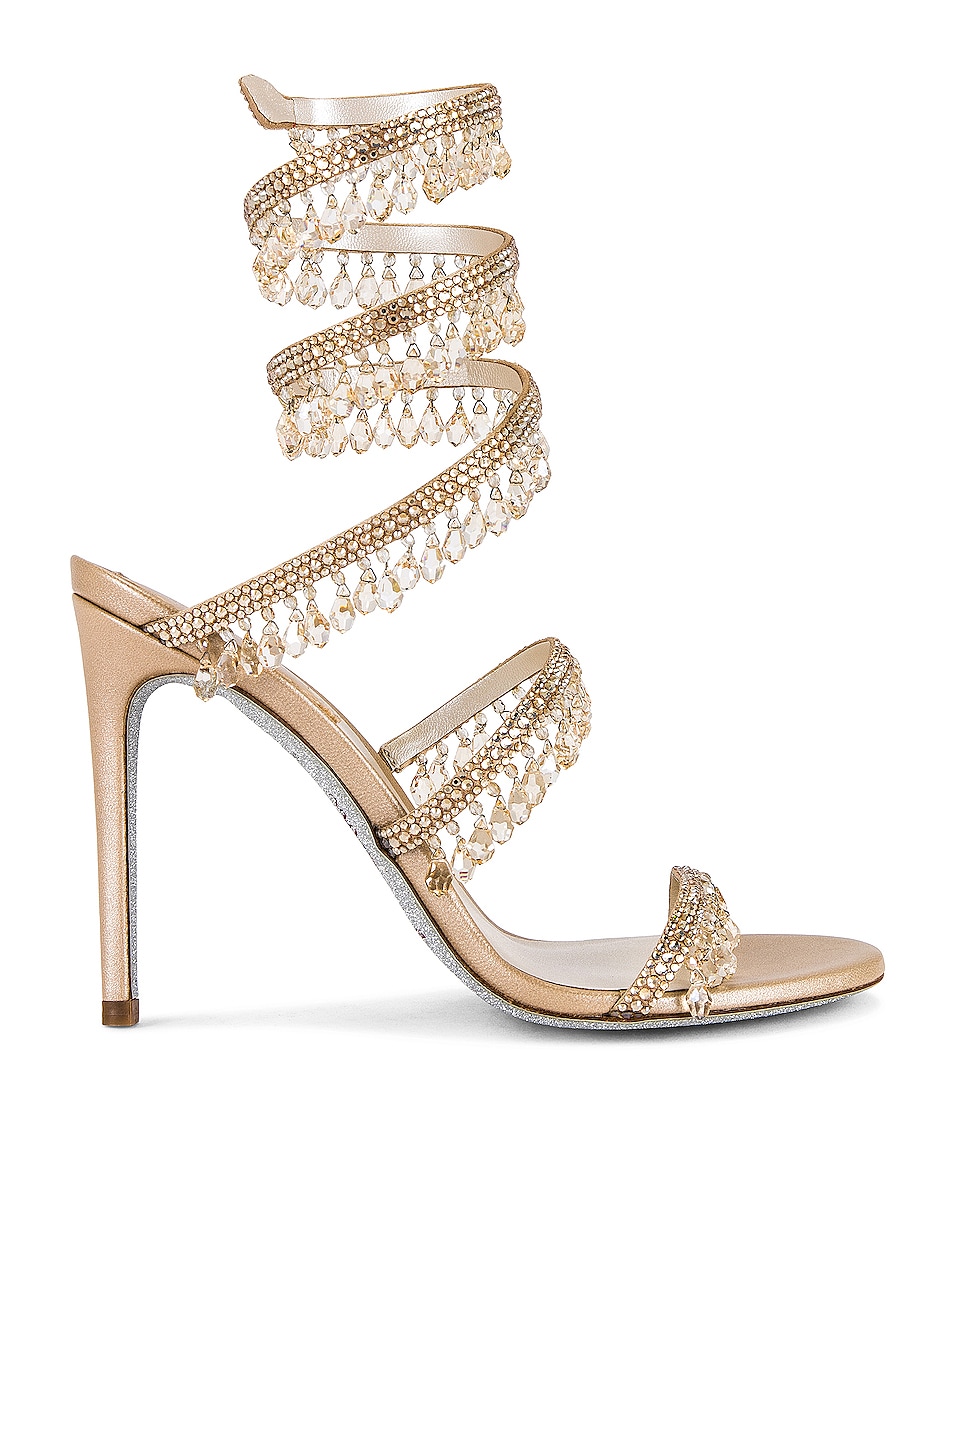 Image 1 of RENE CAOVILLA Chandelier 105mm Lace Up Sandal in Nude, Gold, & Honey